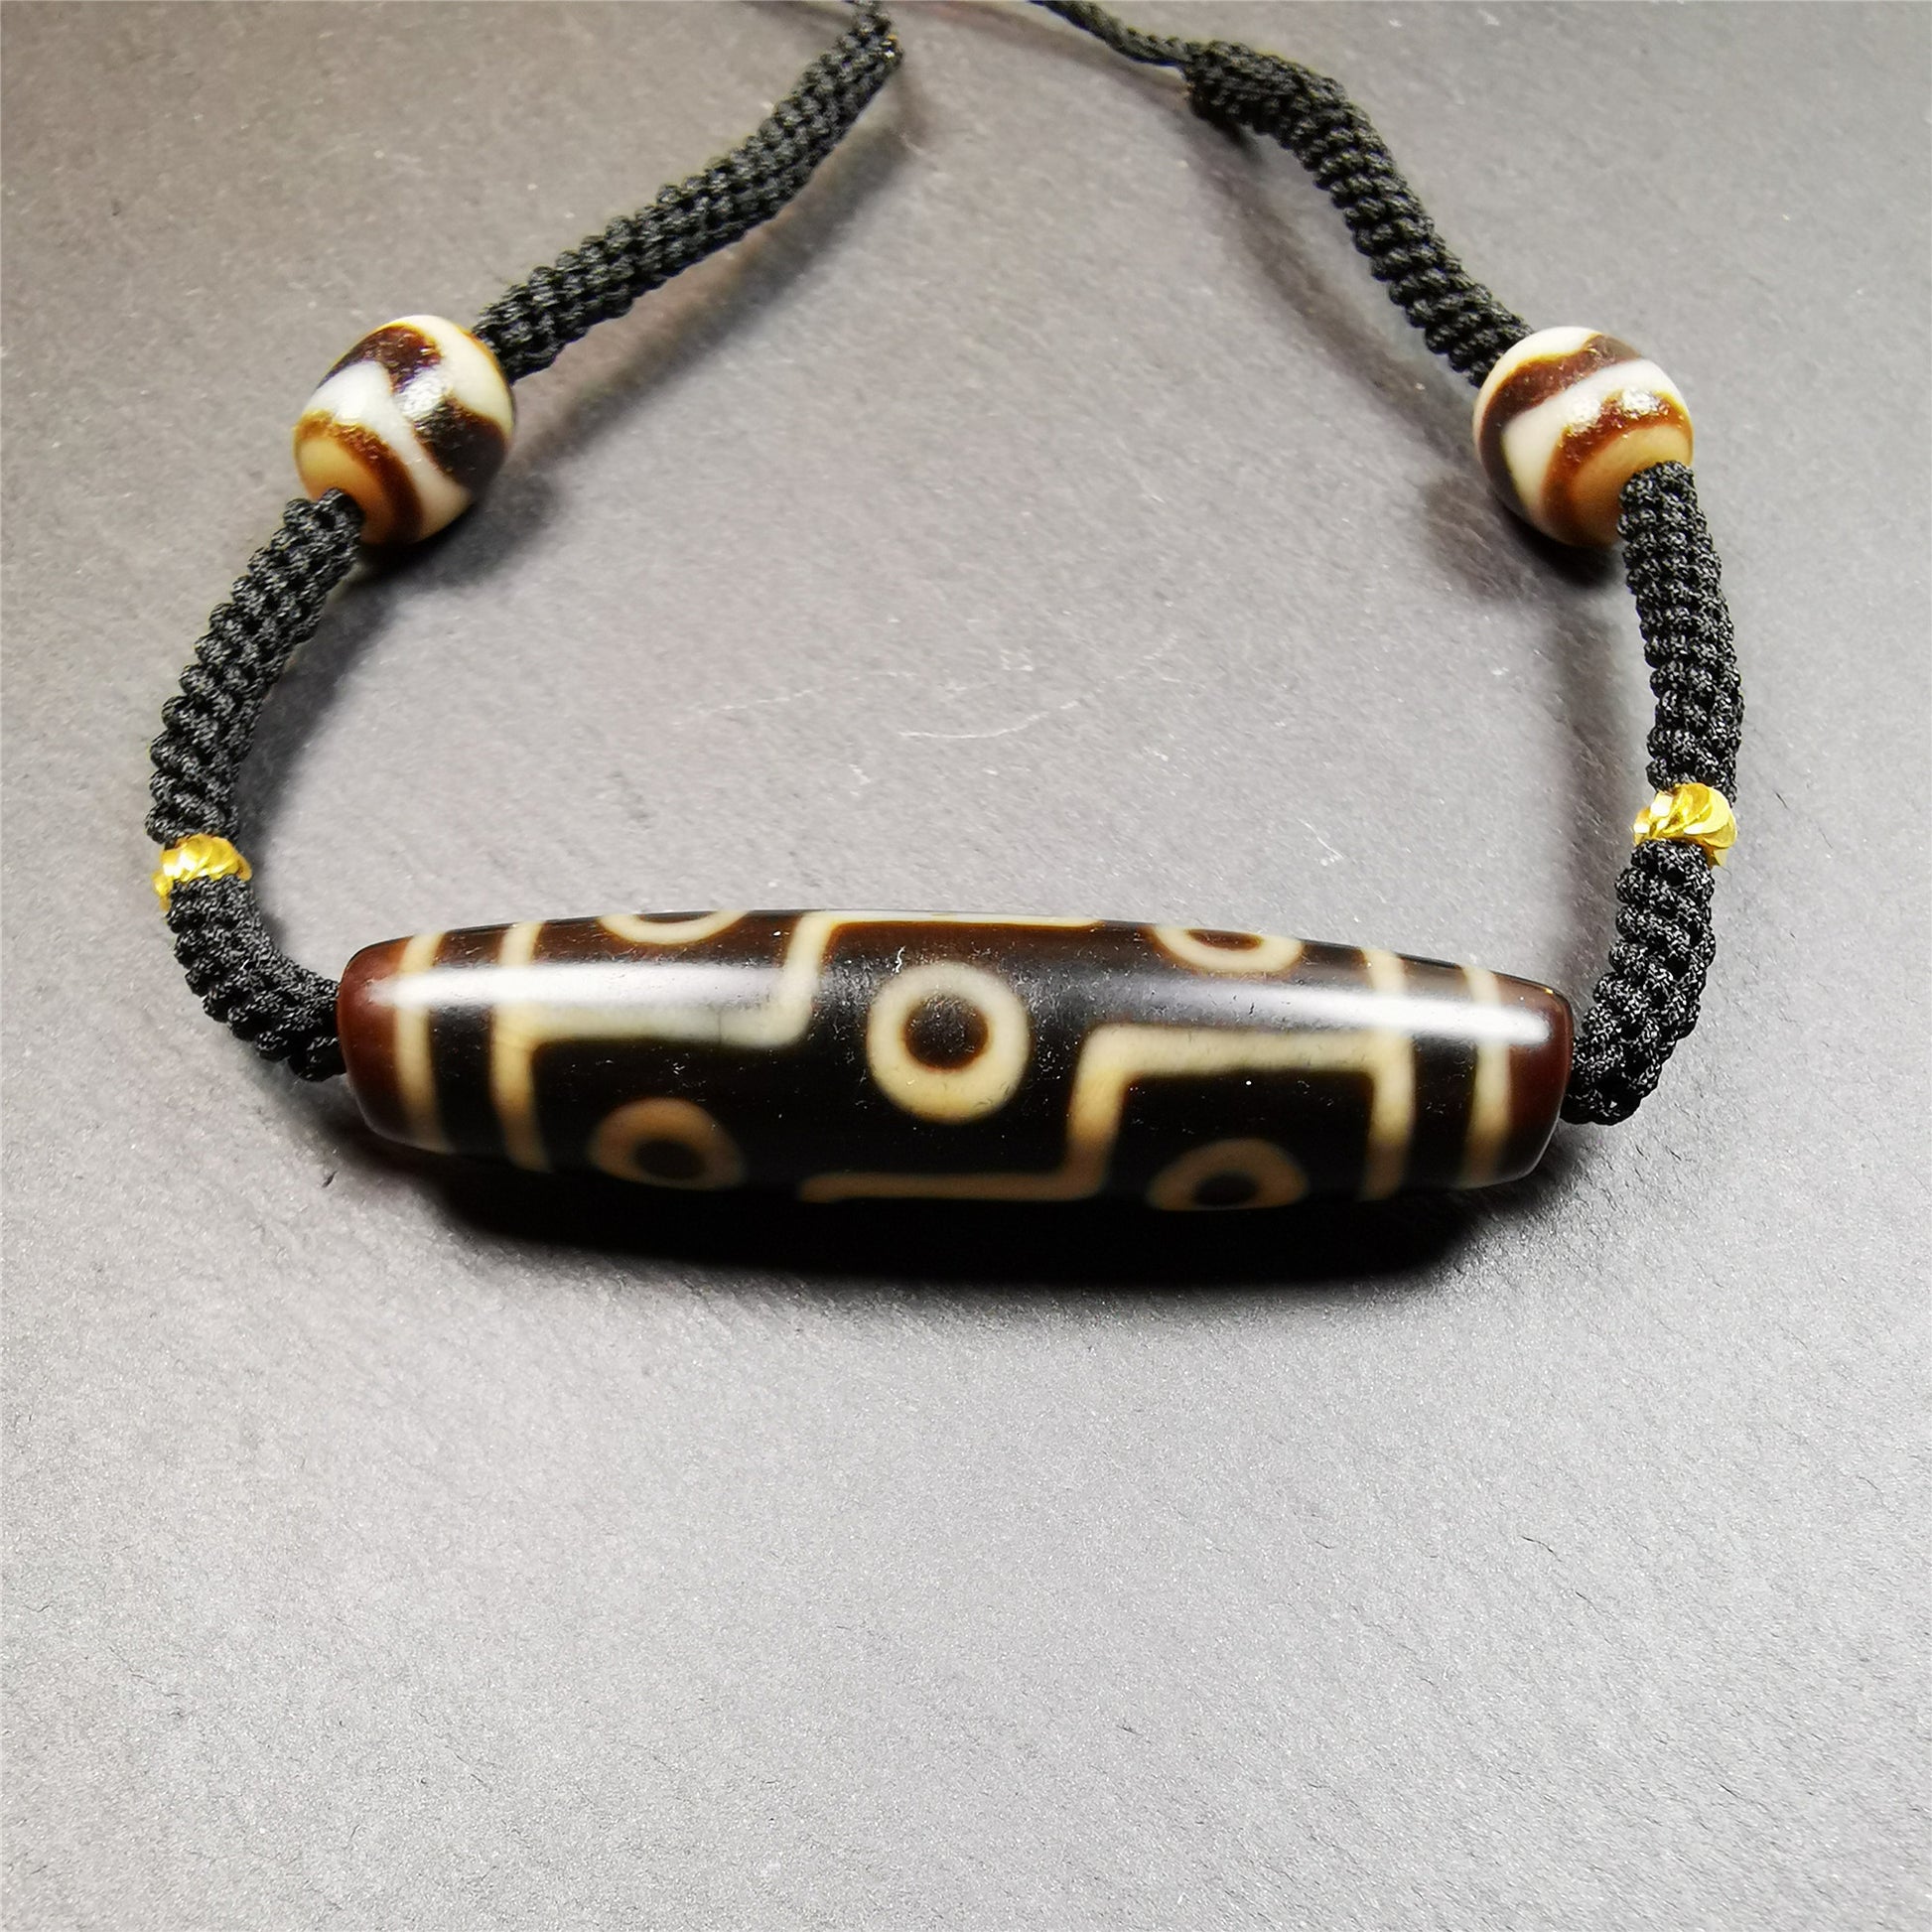 This necklace was hand-woven by Tibetans from Baiyu County, the main bead is a 9 eyed  dzi bead, paired with 2 small tiger tooth dzi beads,about 30 years old. It can be worn as a fashionable accessory,holds cultural and religious significance.